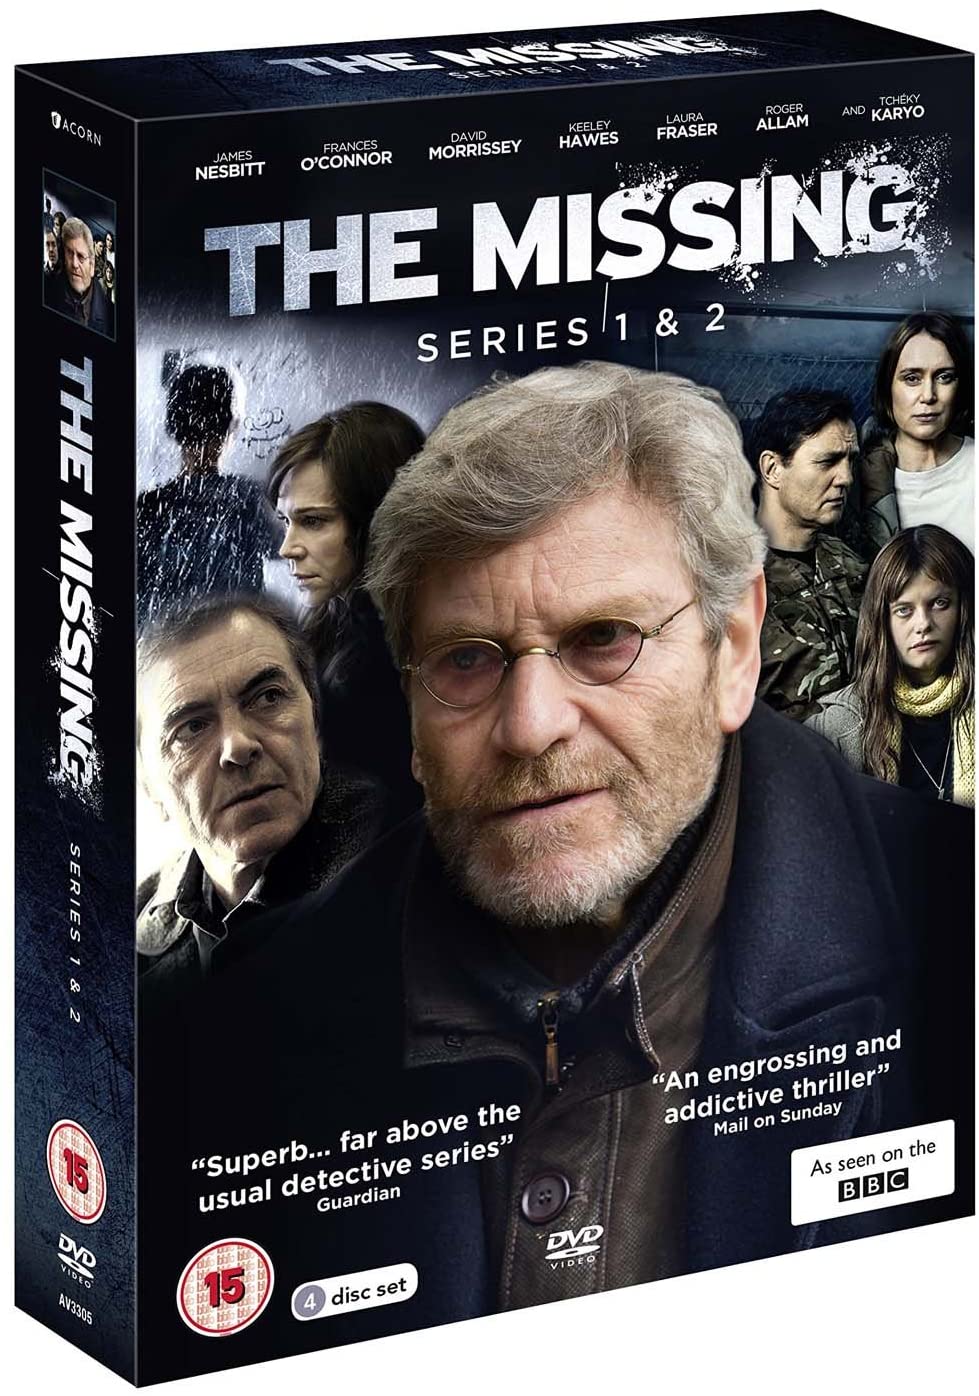 The Missing: Series 1 & 2 [DVD]